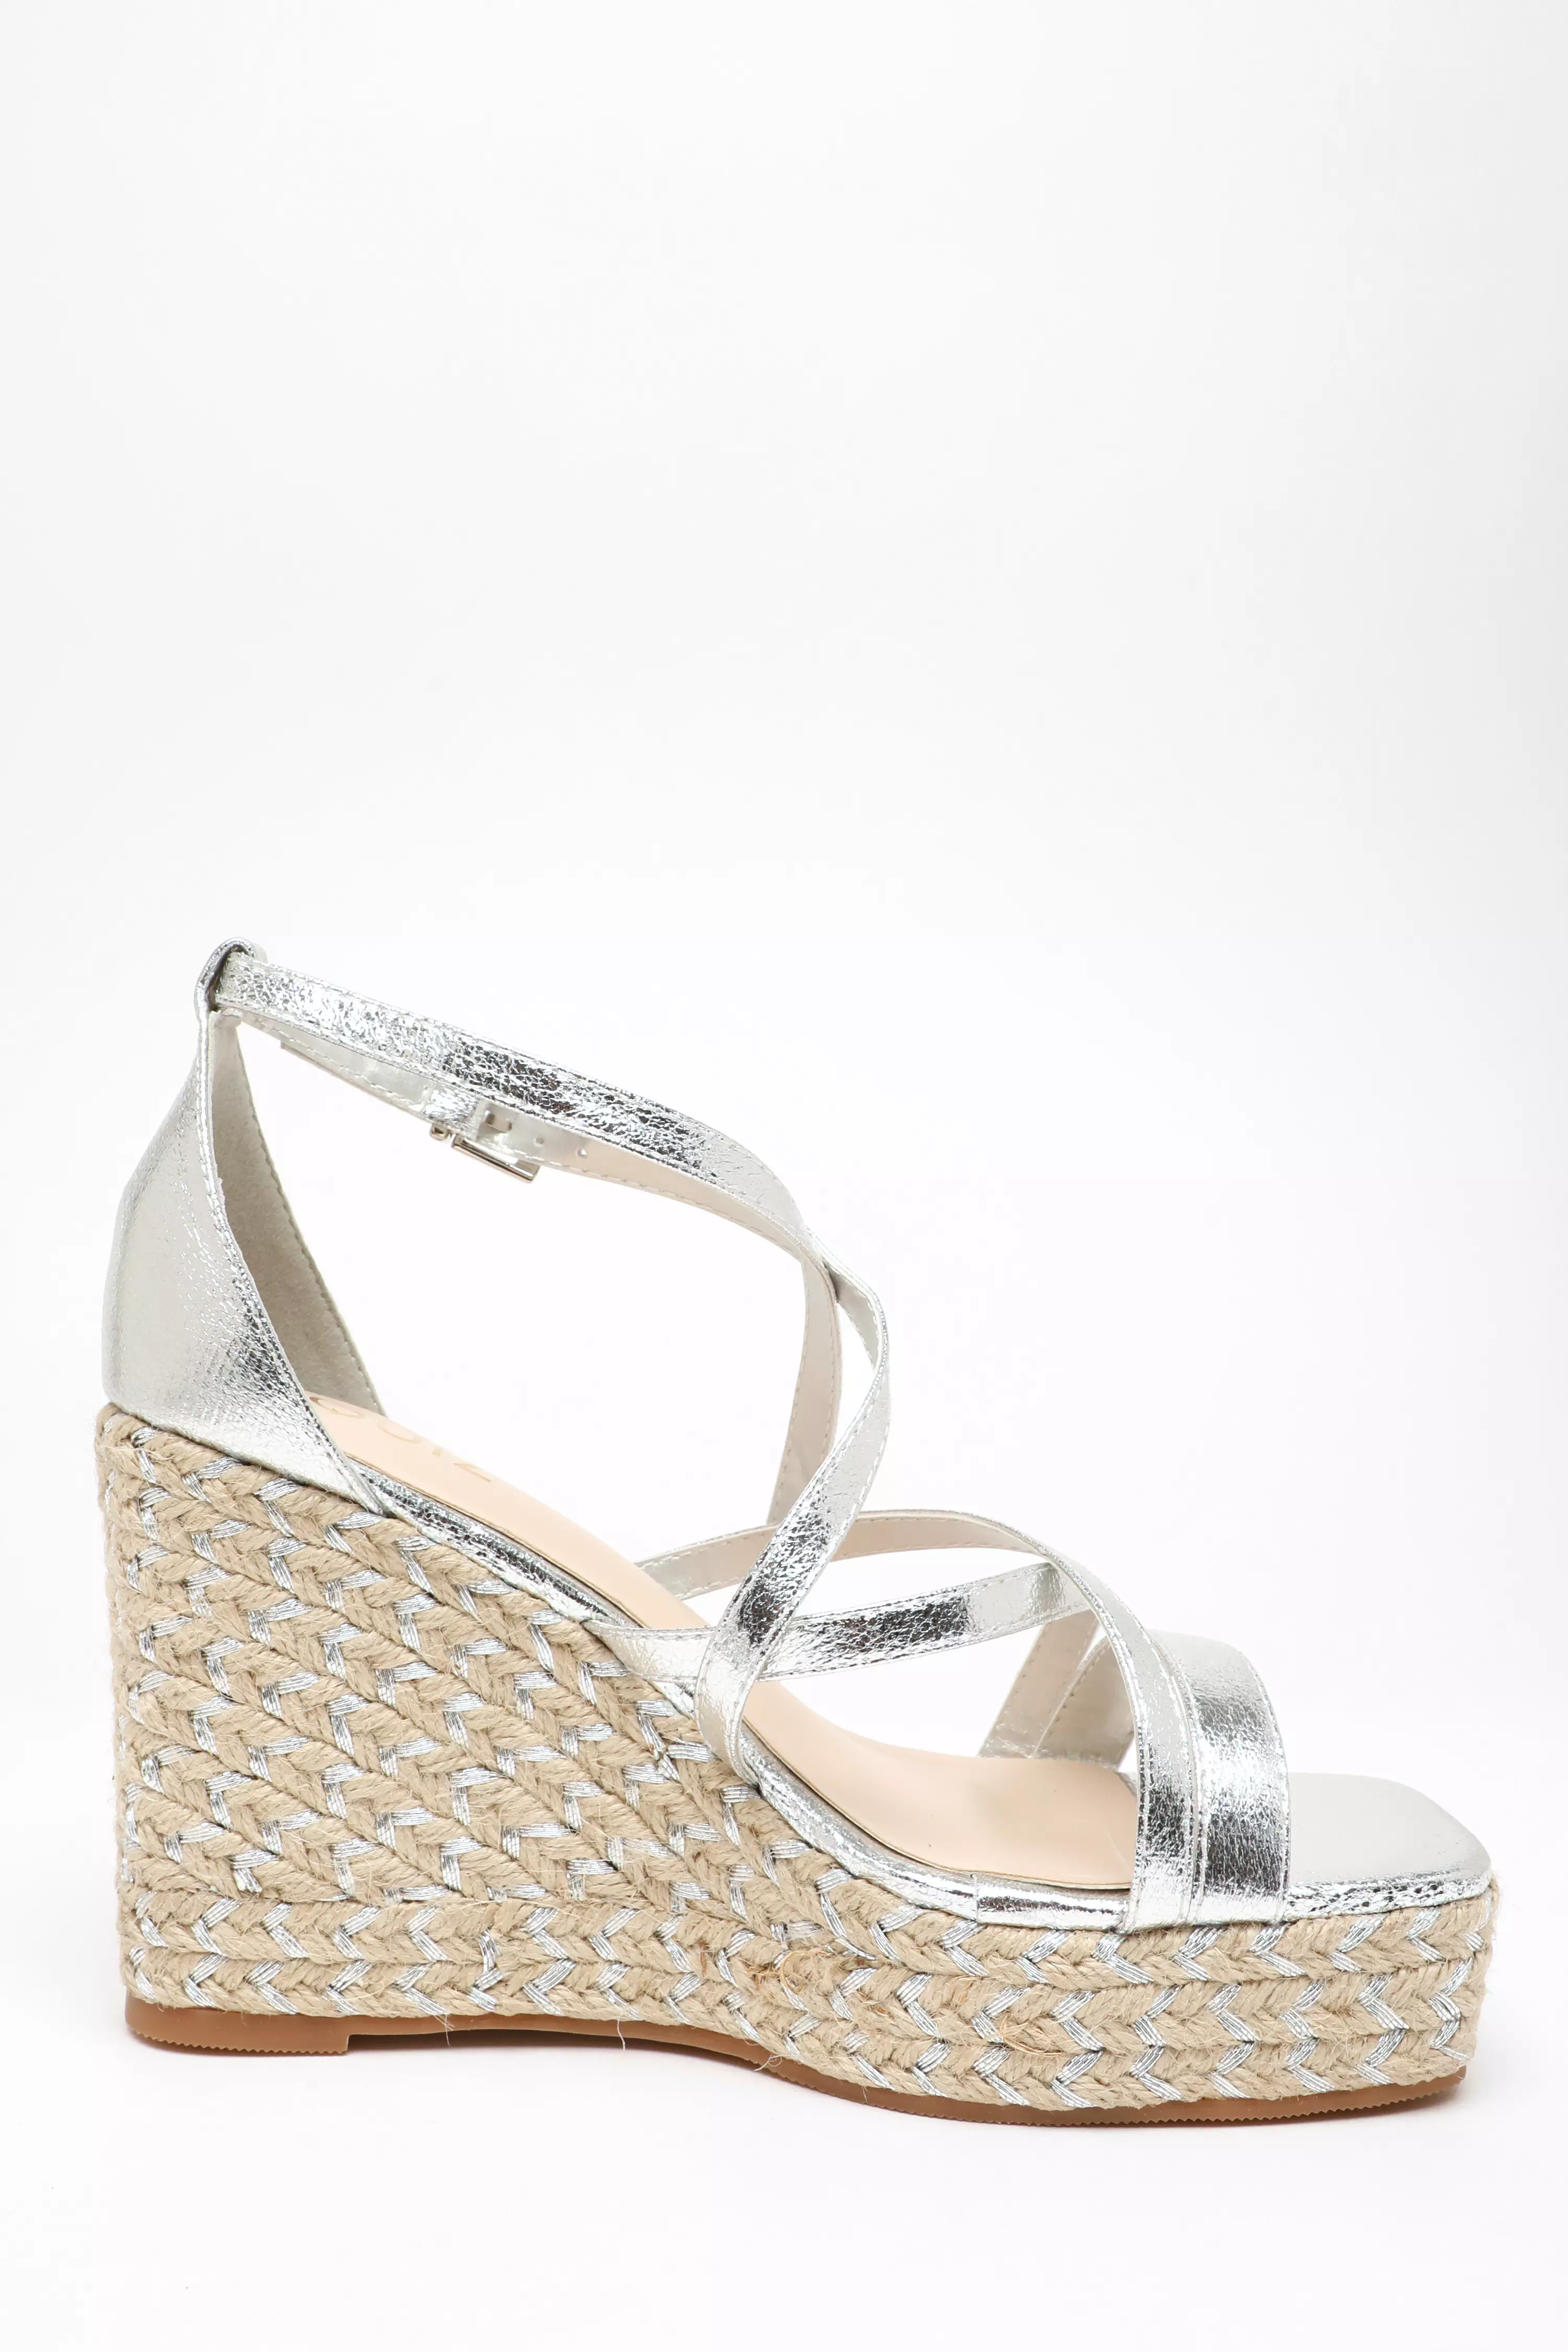 Silver Foil Strappy Woven Wedges